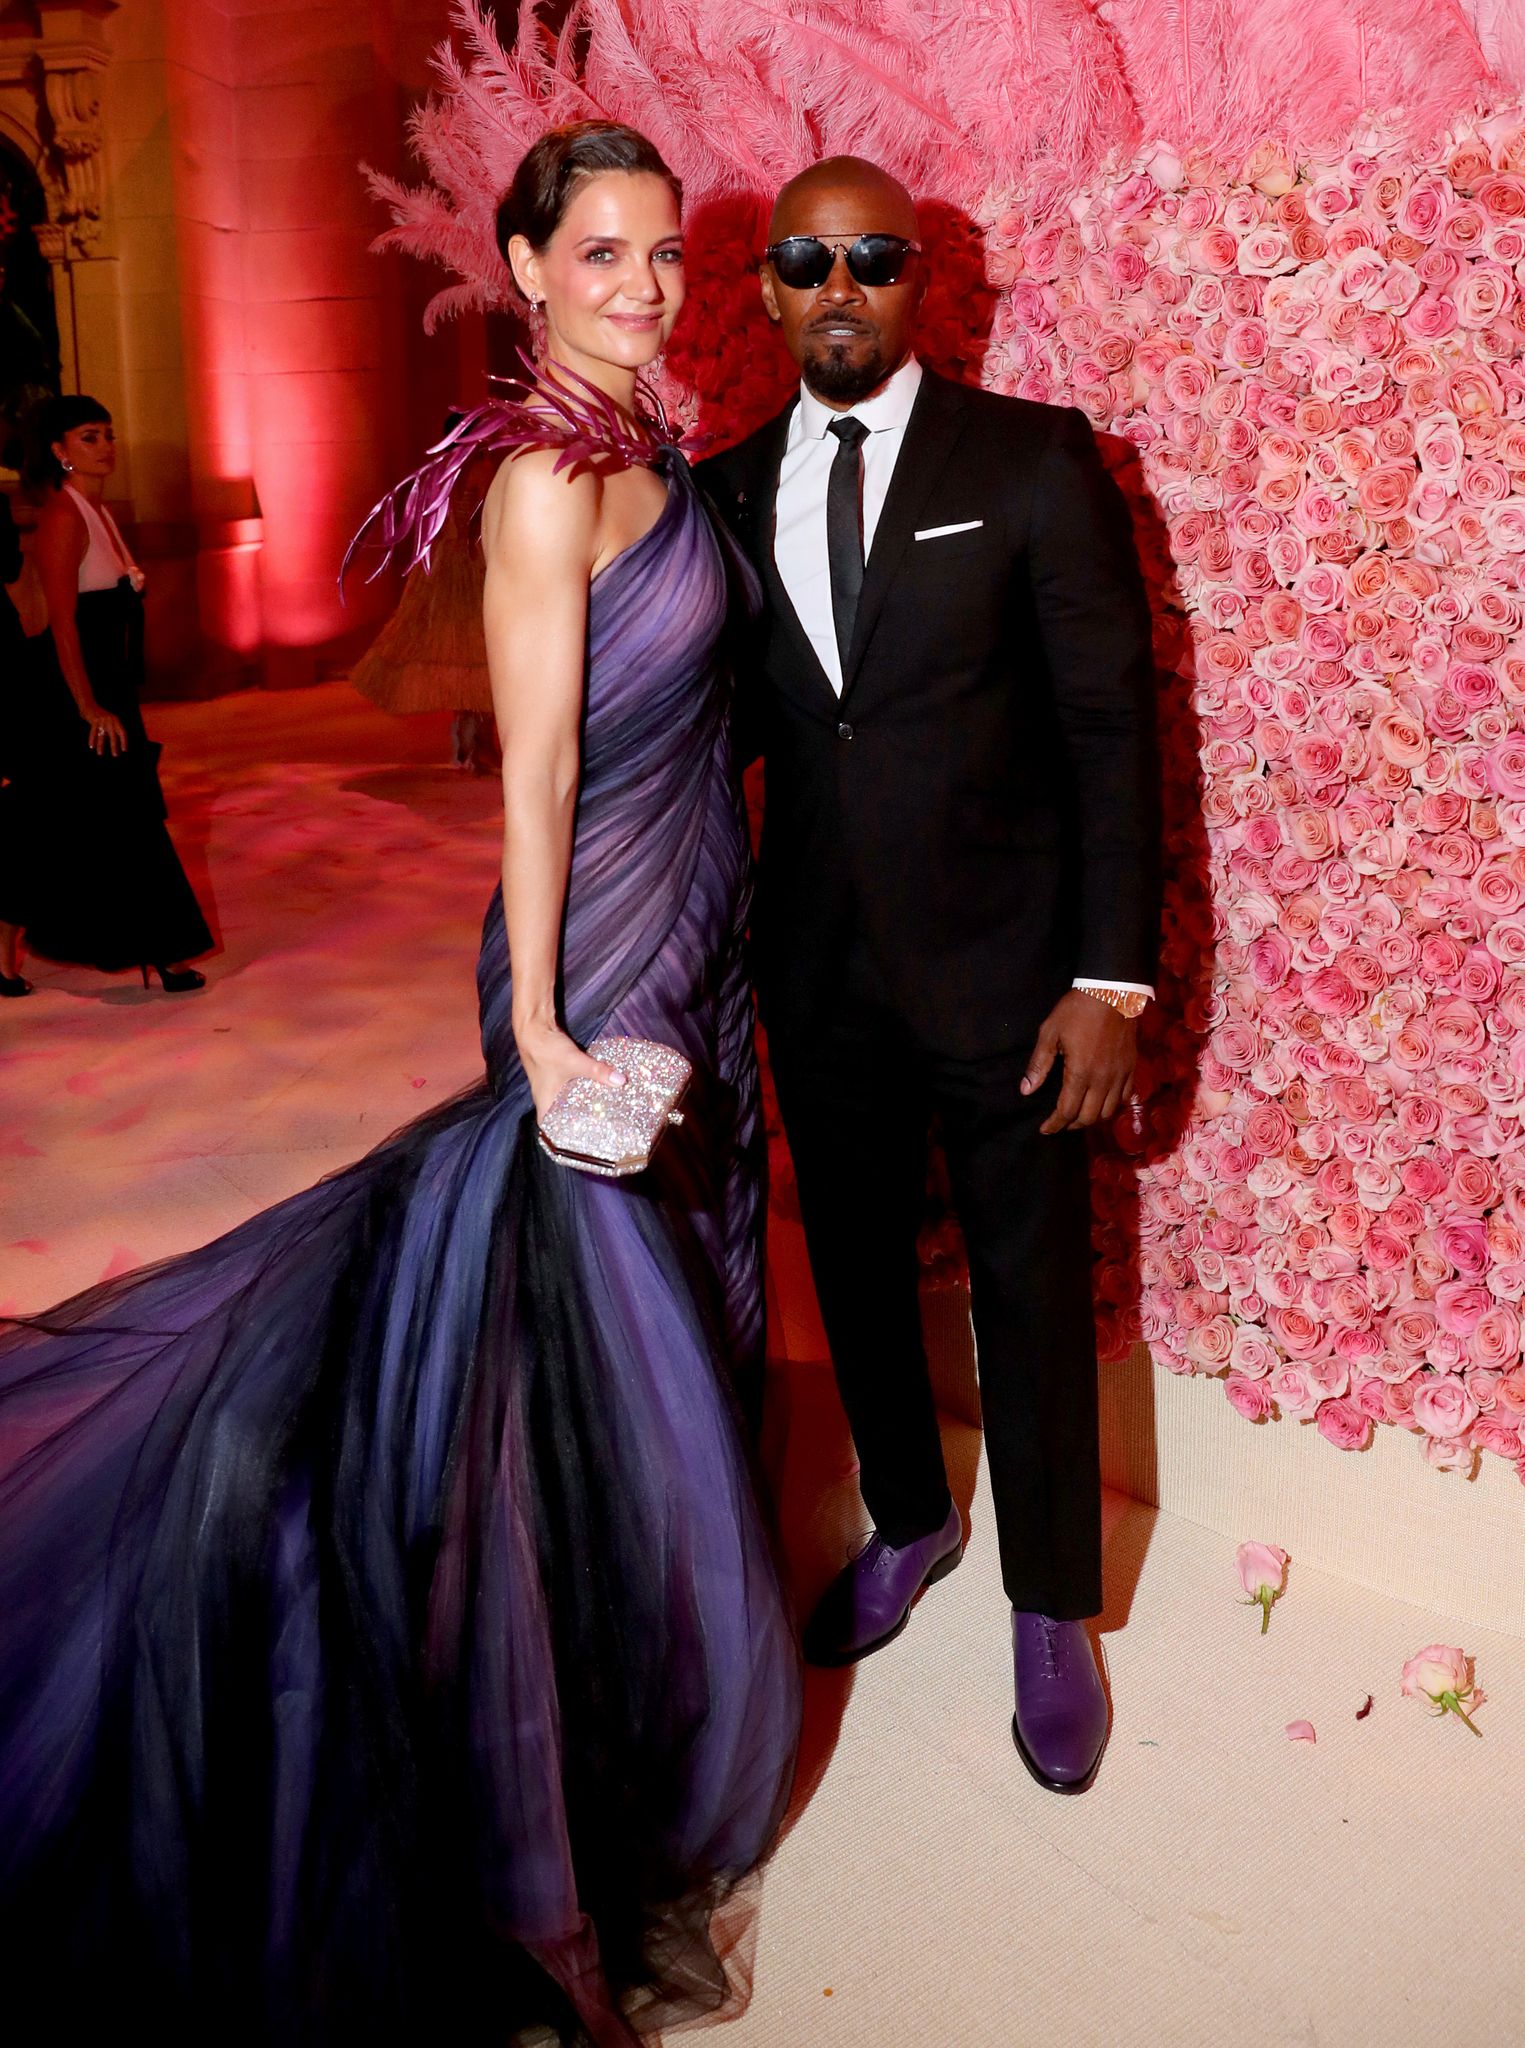 Katie Holmes and Jamie Foxx at Metropolitan Museum of Art on May 6, 2019 in New York City. | Source: Getty Images